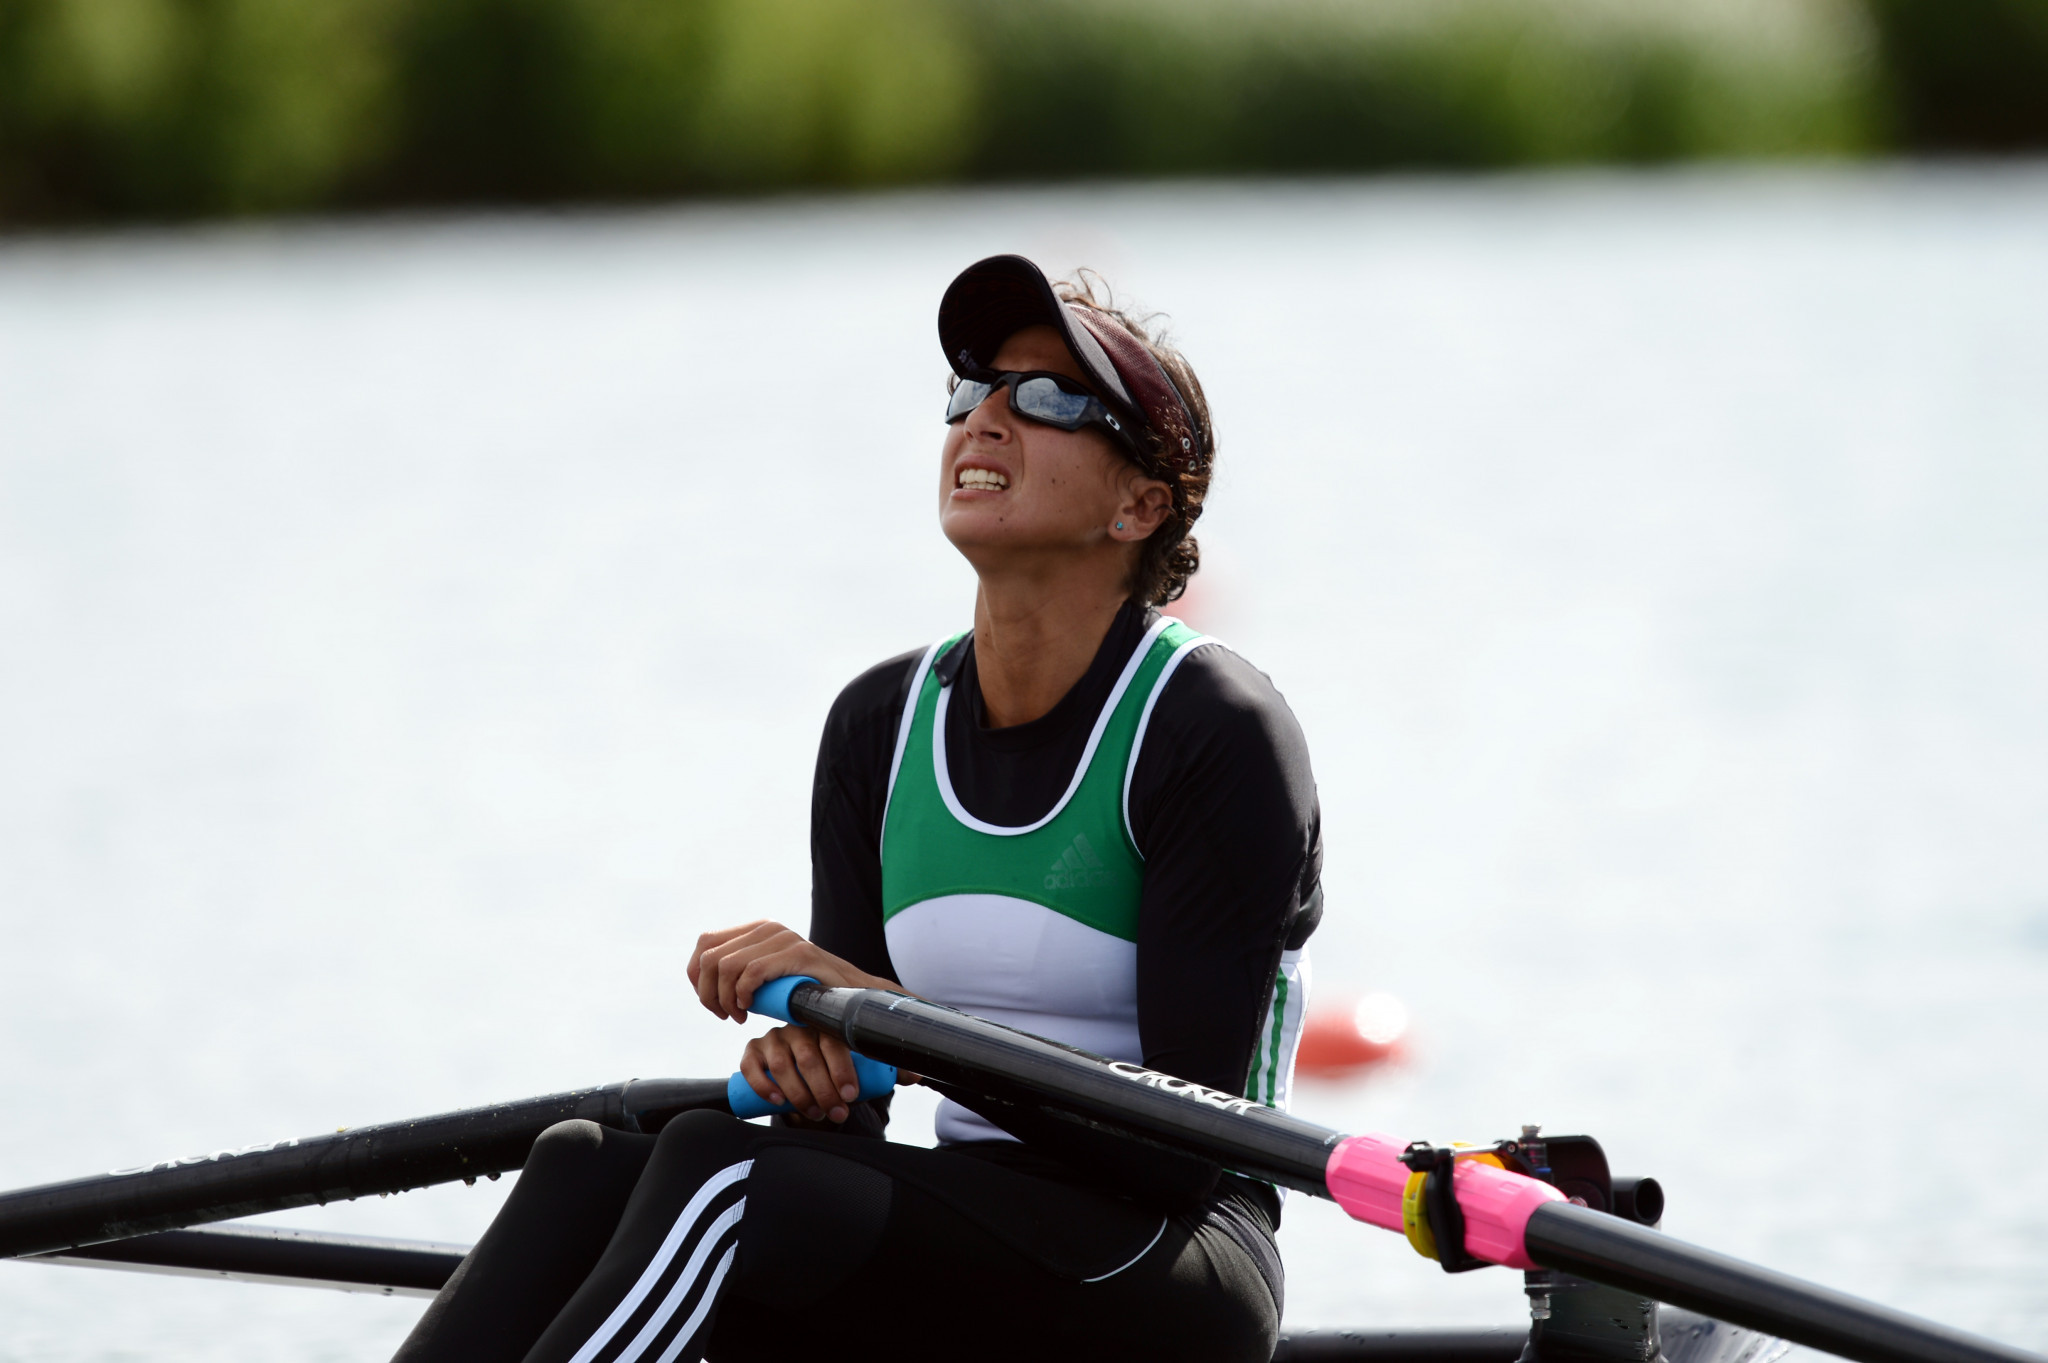 Amina Rouba, pictured, then combined with Nawel Chiali to win the women's double sculls ©Getty Images